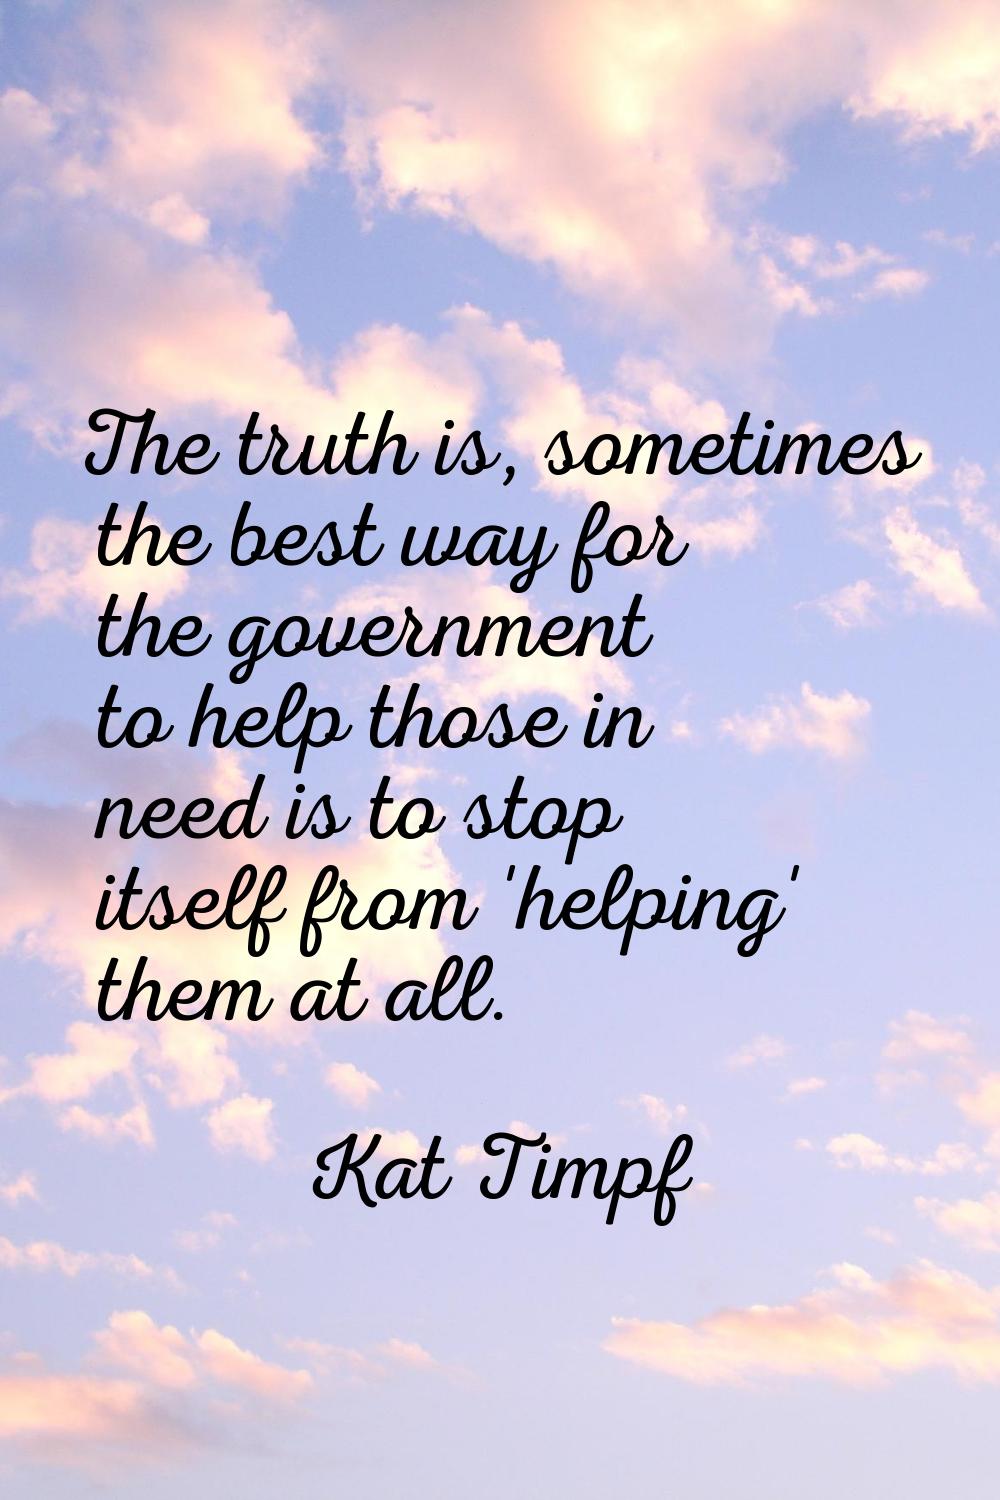 The truth is, sometimes the best way for the government to help those in need is to stop itself fro